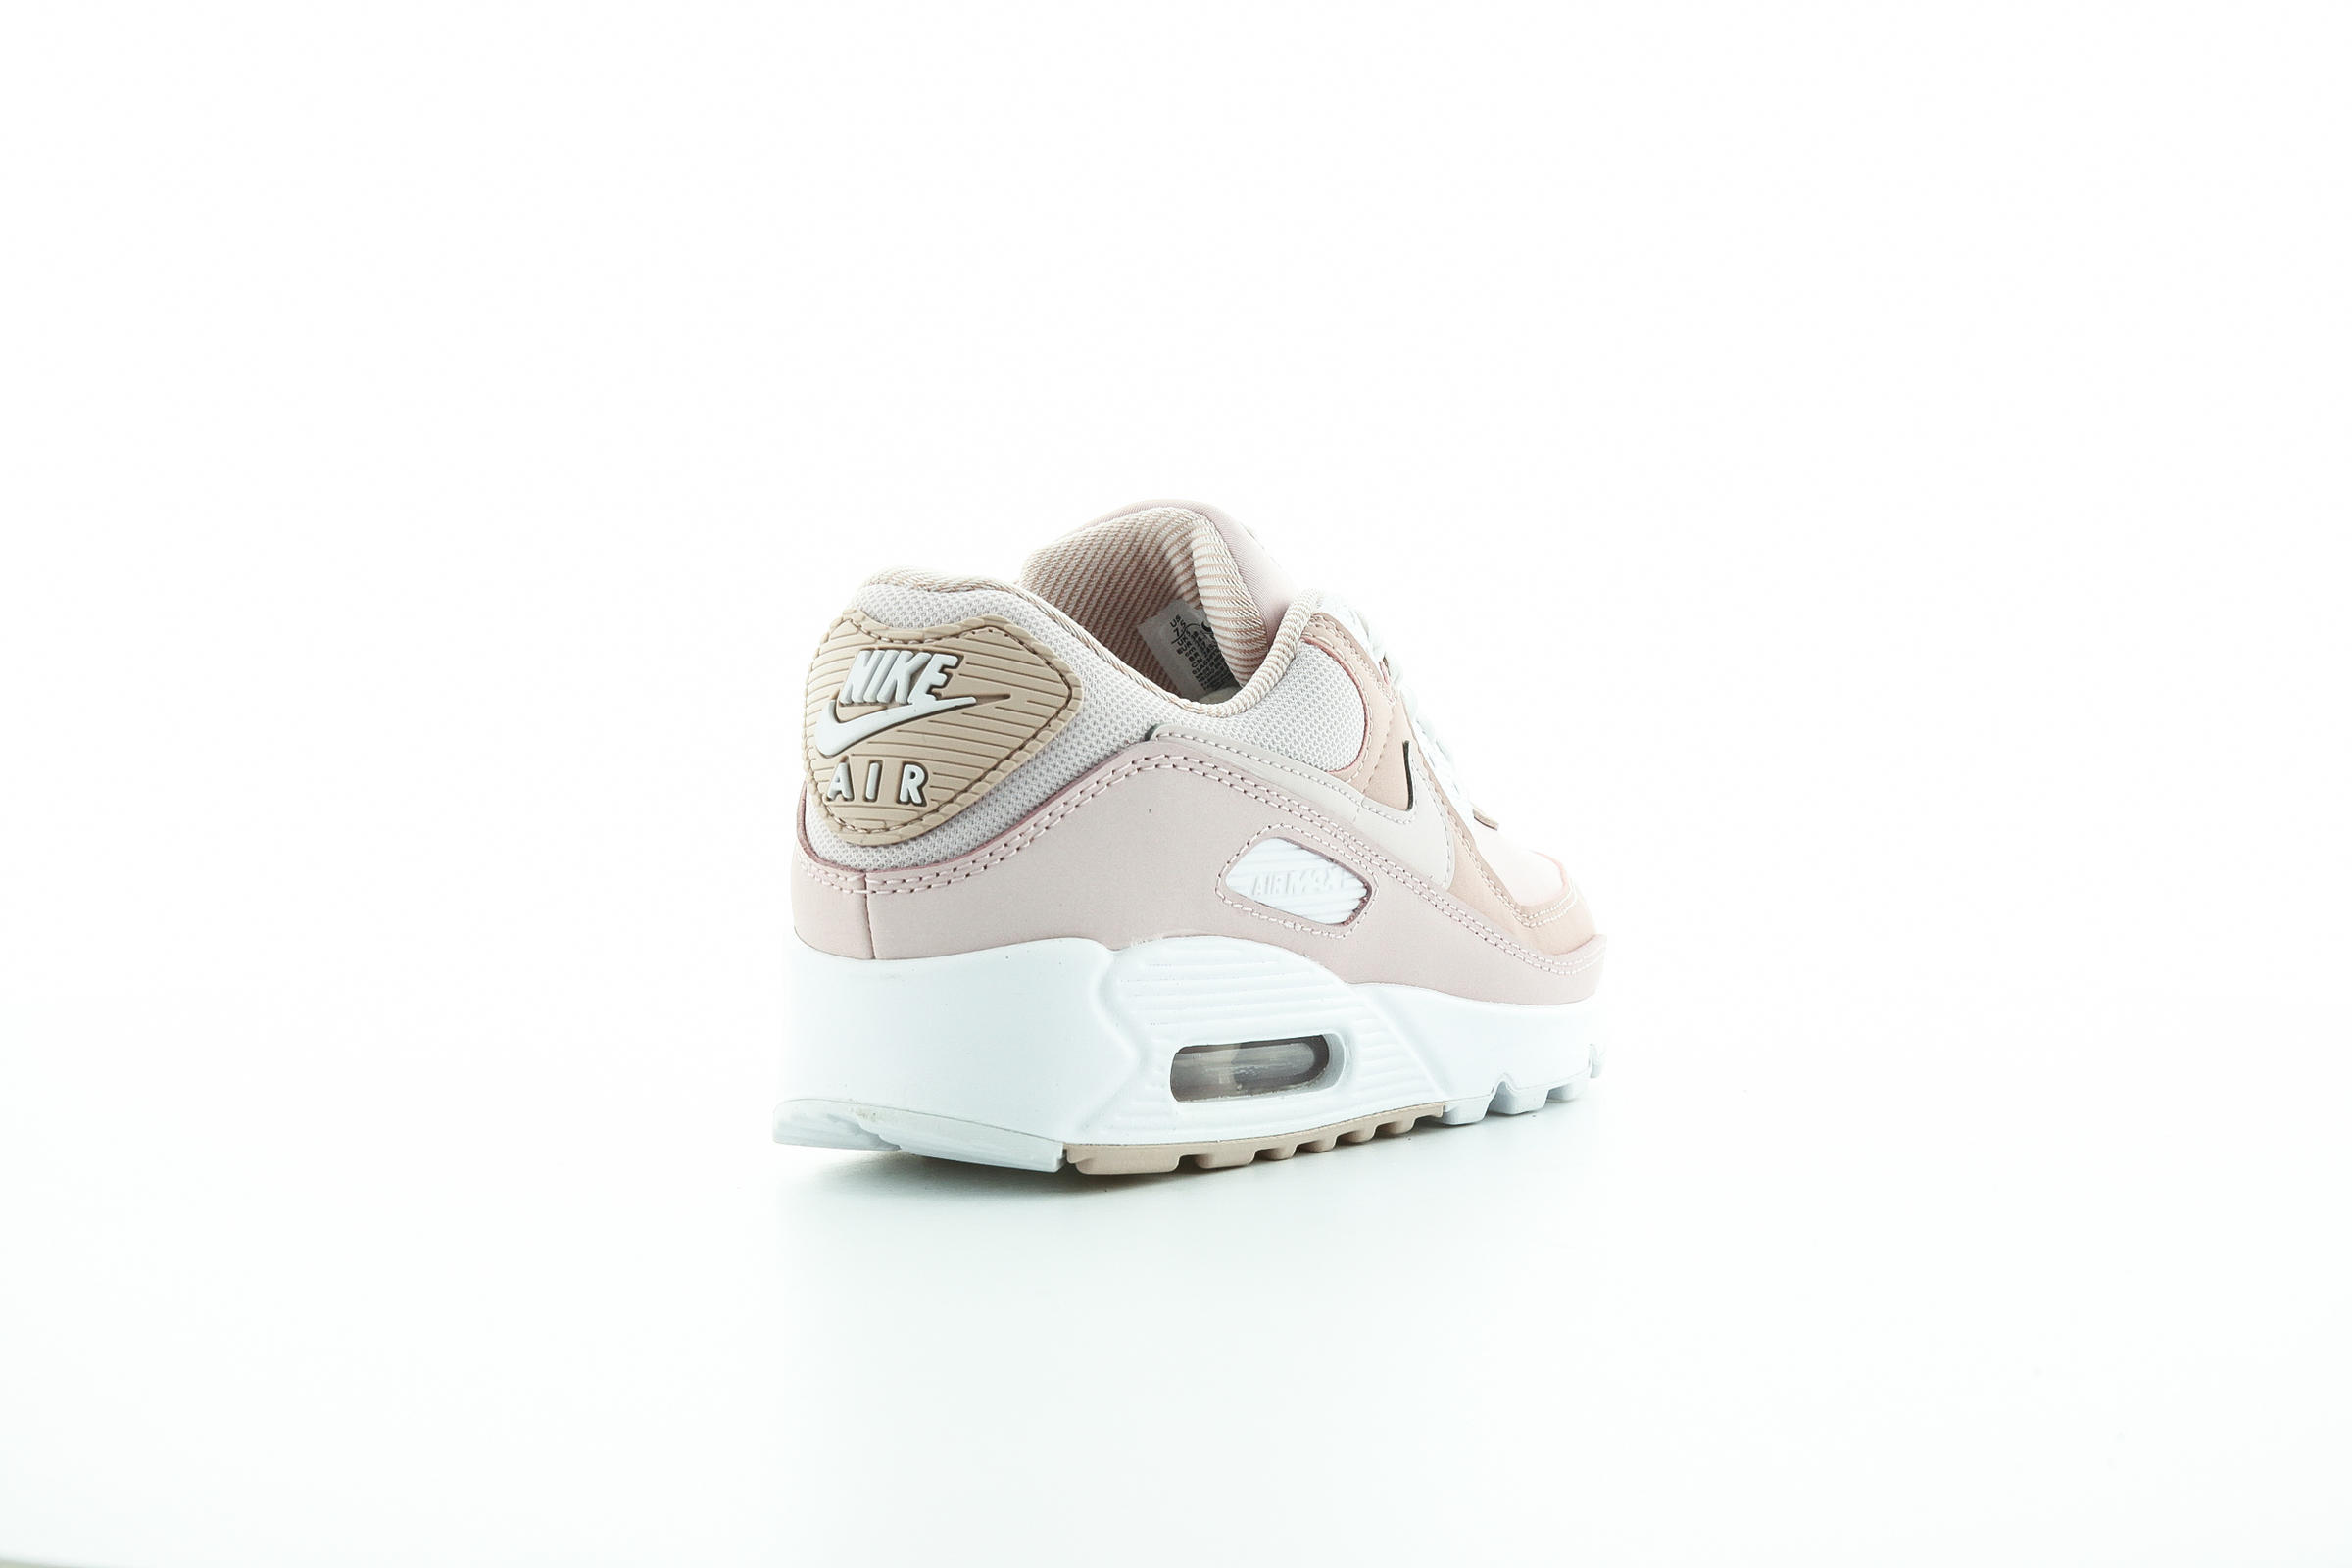 Nike WMNS AIR MAX 90 "BARELY ROSE"